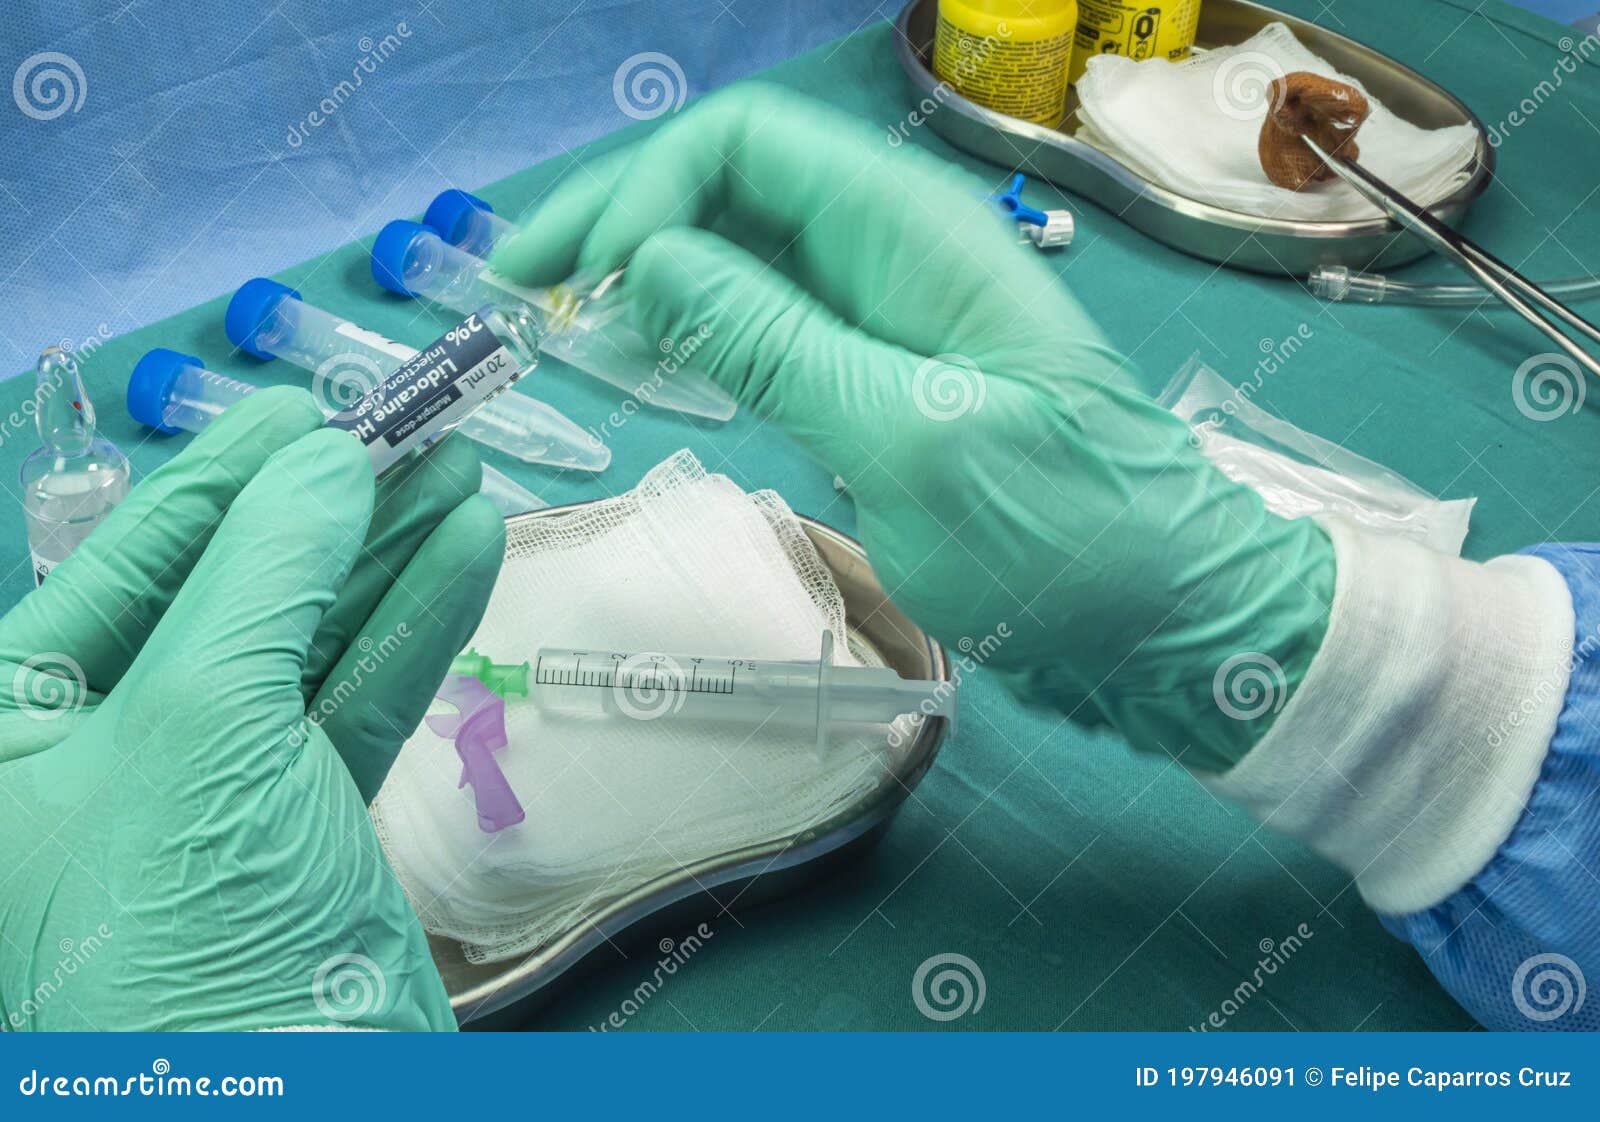 nurse breaks anesthesia vial, preparation to extract cerebrospinal fluid to investigate causes in a person affected by transverse